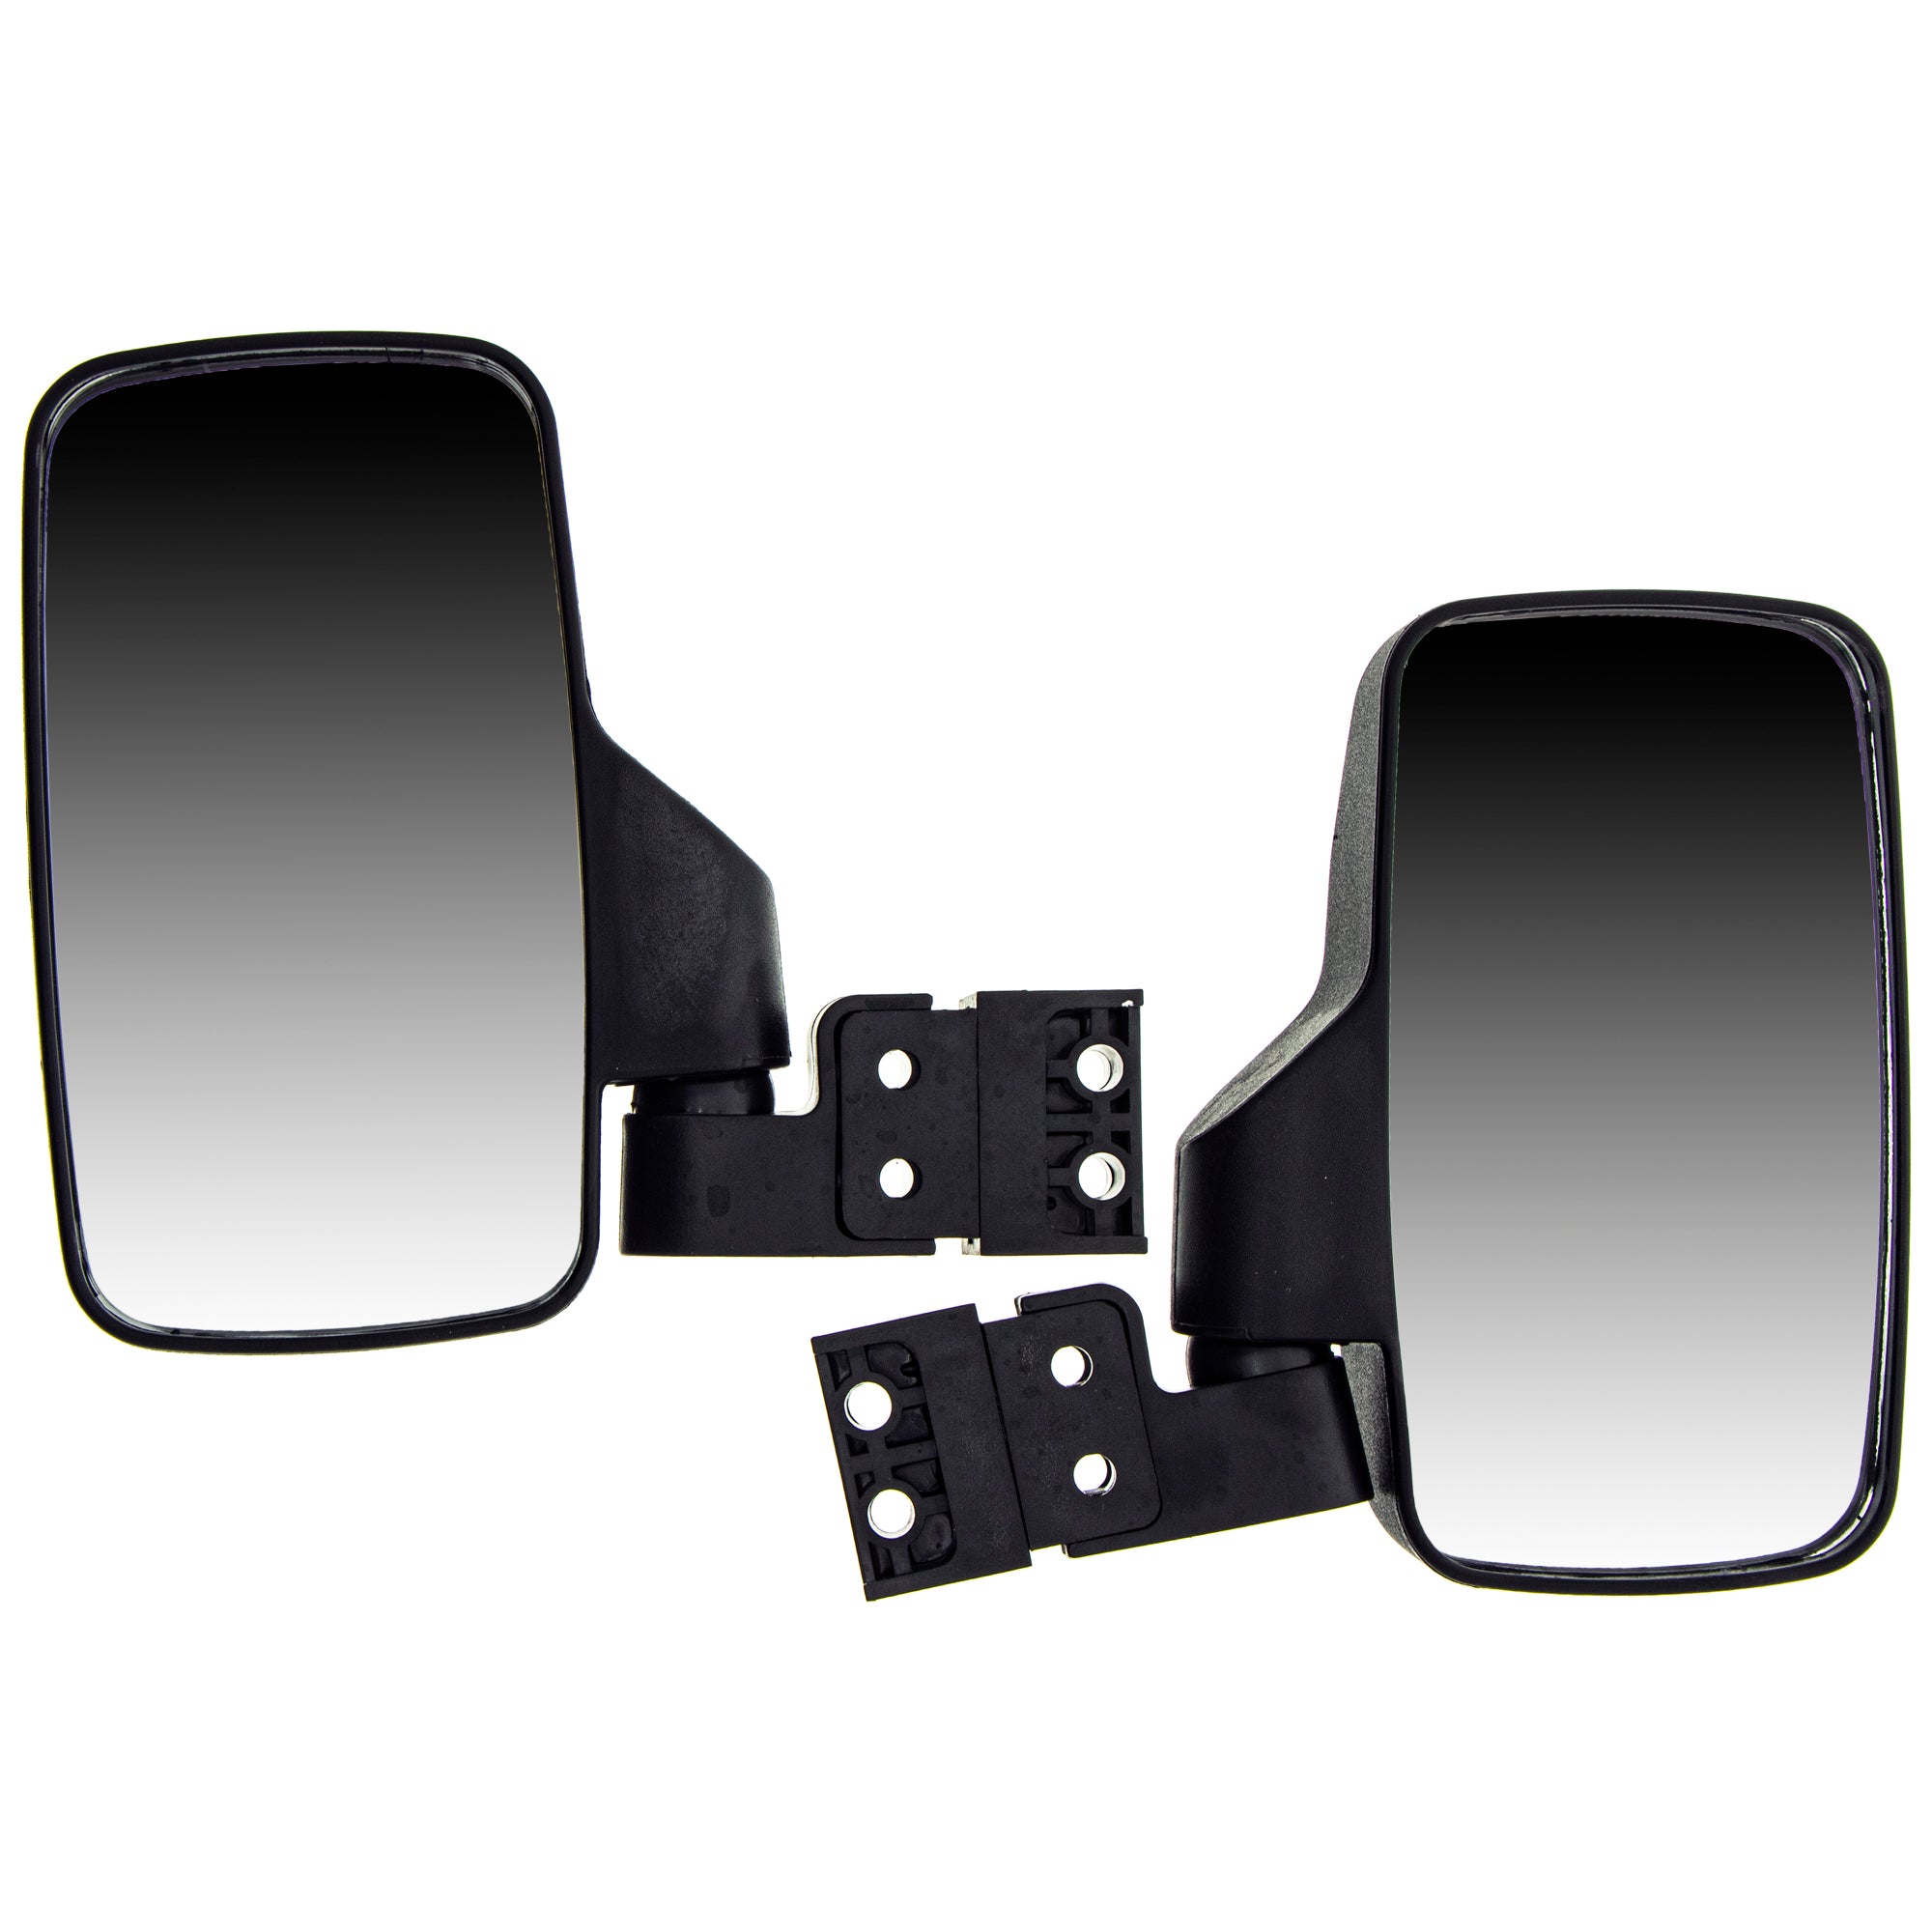 Black Side View Mirror Pro-Fit Set for Honda Pioneer 1000 500 700